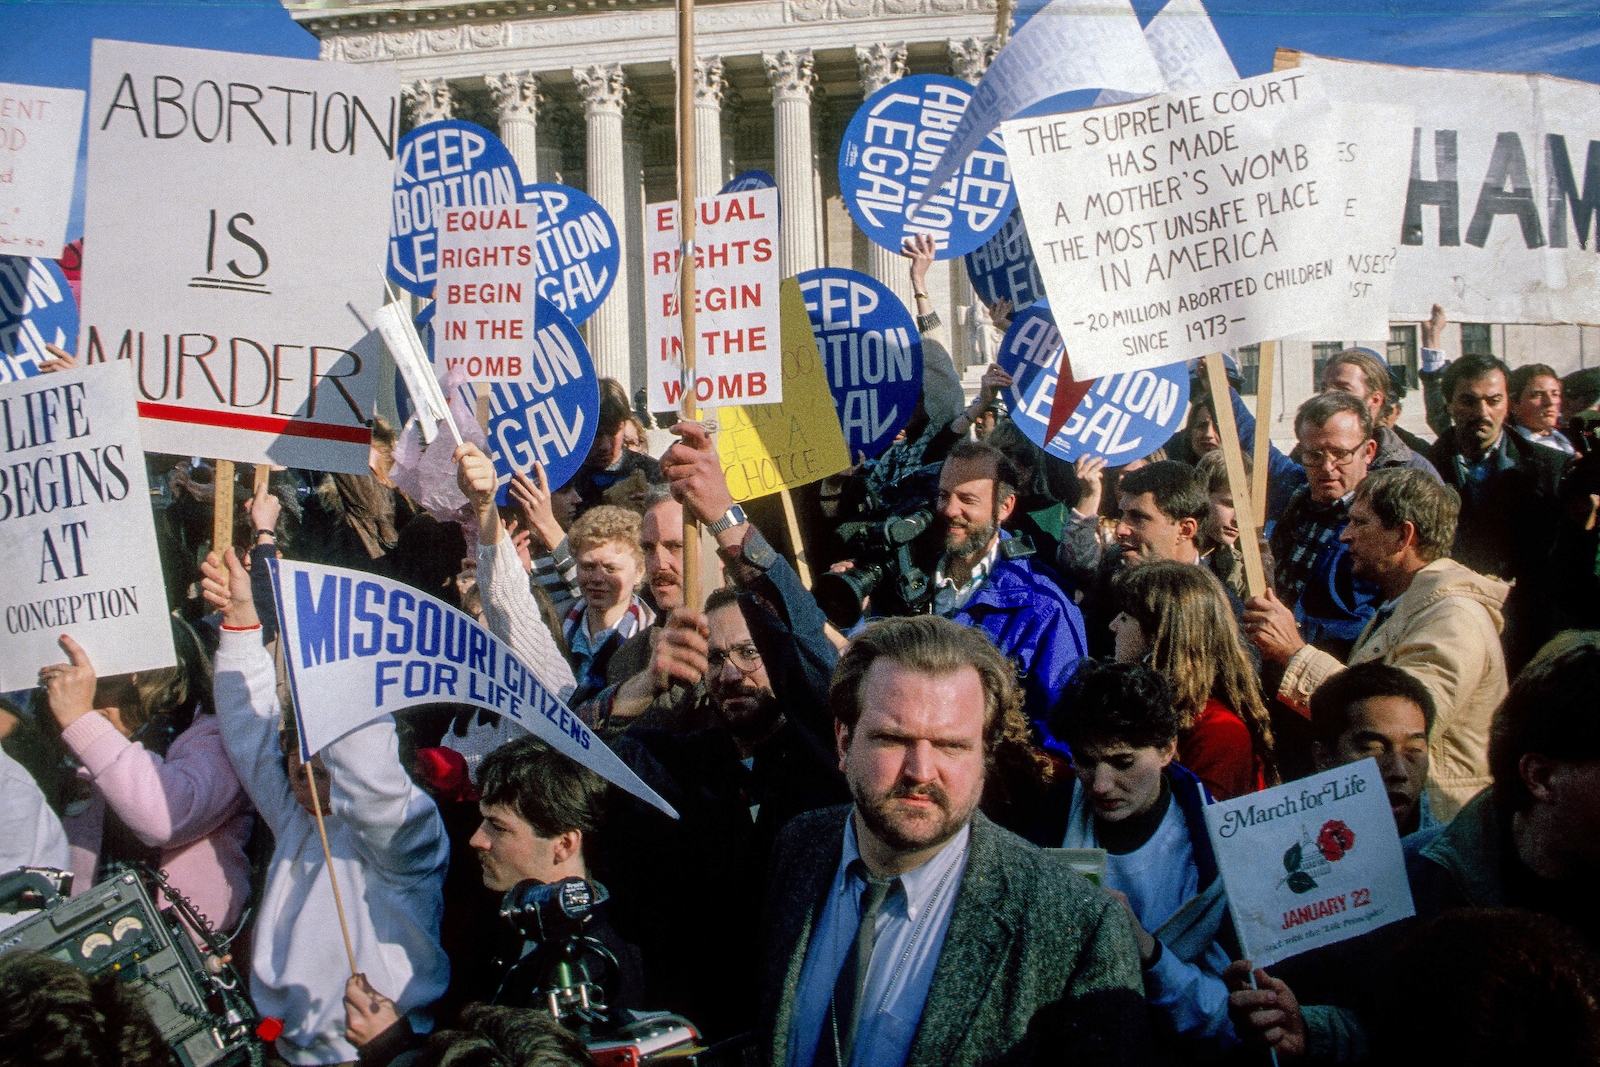 Abortion protest in 1989